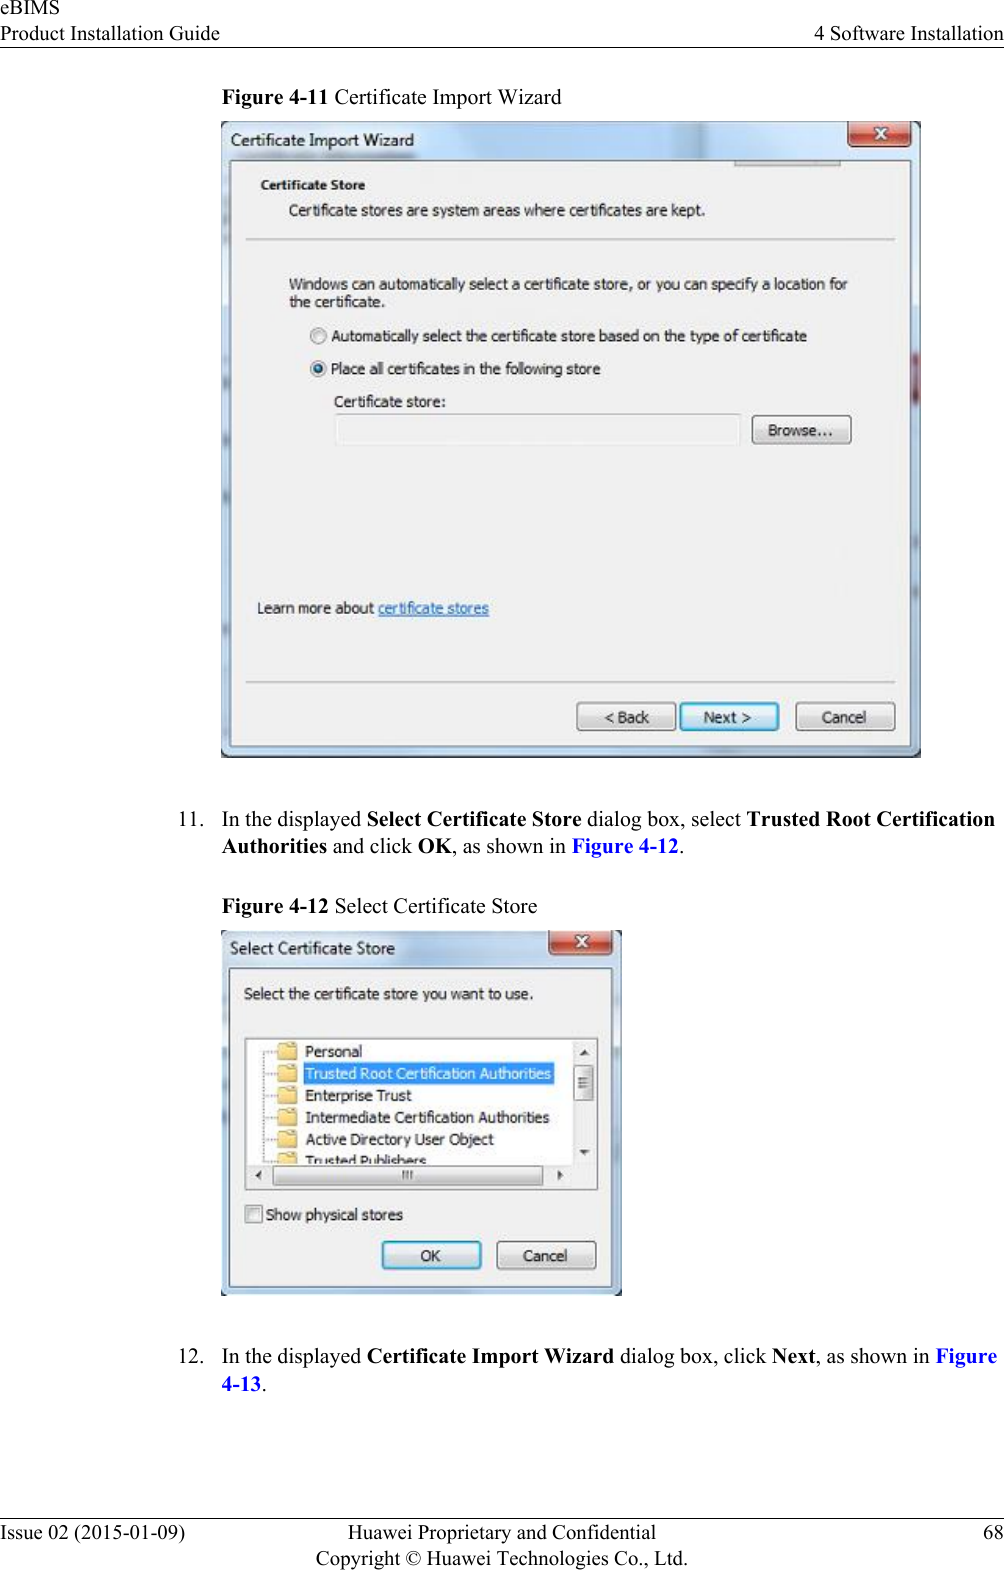 Figure 4-11 Certificate Import Wizard11. In the displayed Select Certificate Store dialog box, select Trusted Root CertificationAuthorities and click OK, as shown in Figure 4-12.Figure 4-12 Select Certificate Store12. In the displayed Certificate Import Wizard dialog box, click Next, as shown in Figure4-13.eBIMSProduct Installation Guide 4 Software InstallationIssue 02 (2015-01-09) Huawei Proprietary and ConfidentialCopyright © Huawei Technologies Co., Ltd.68